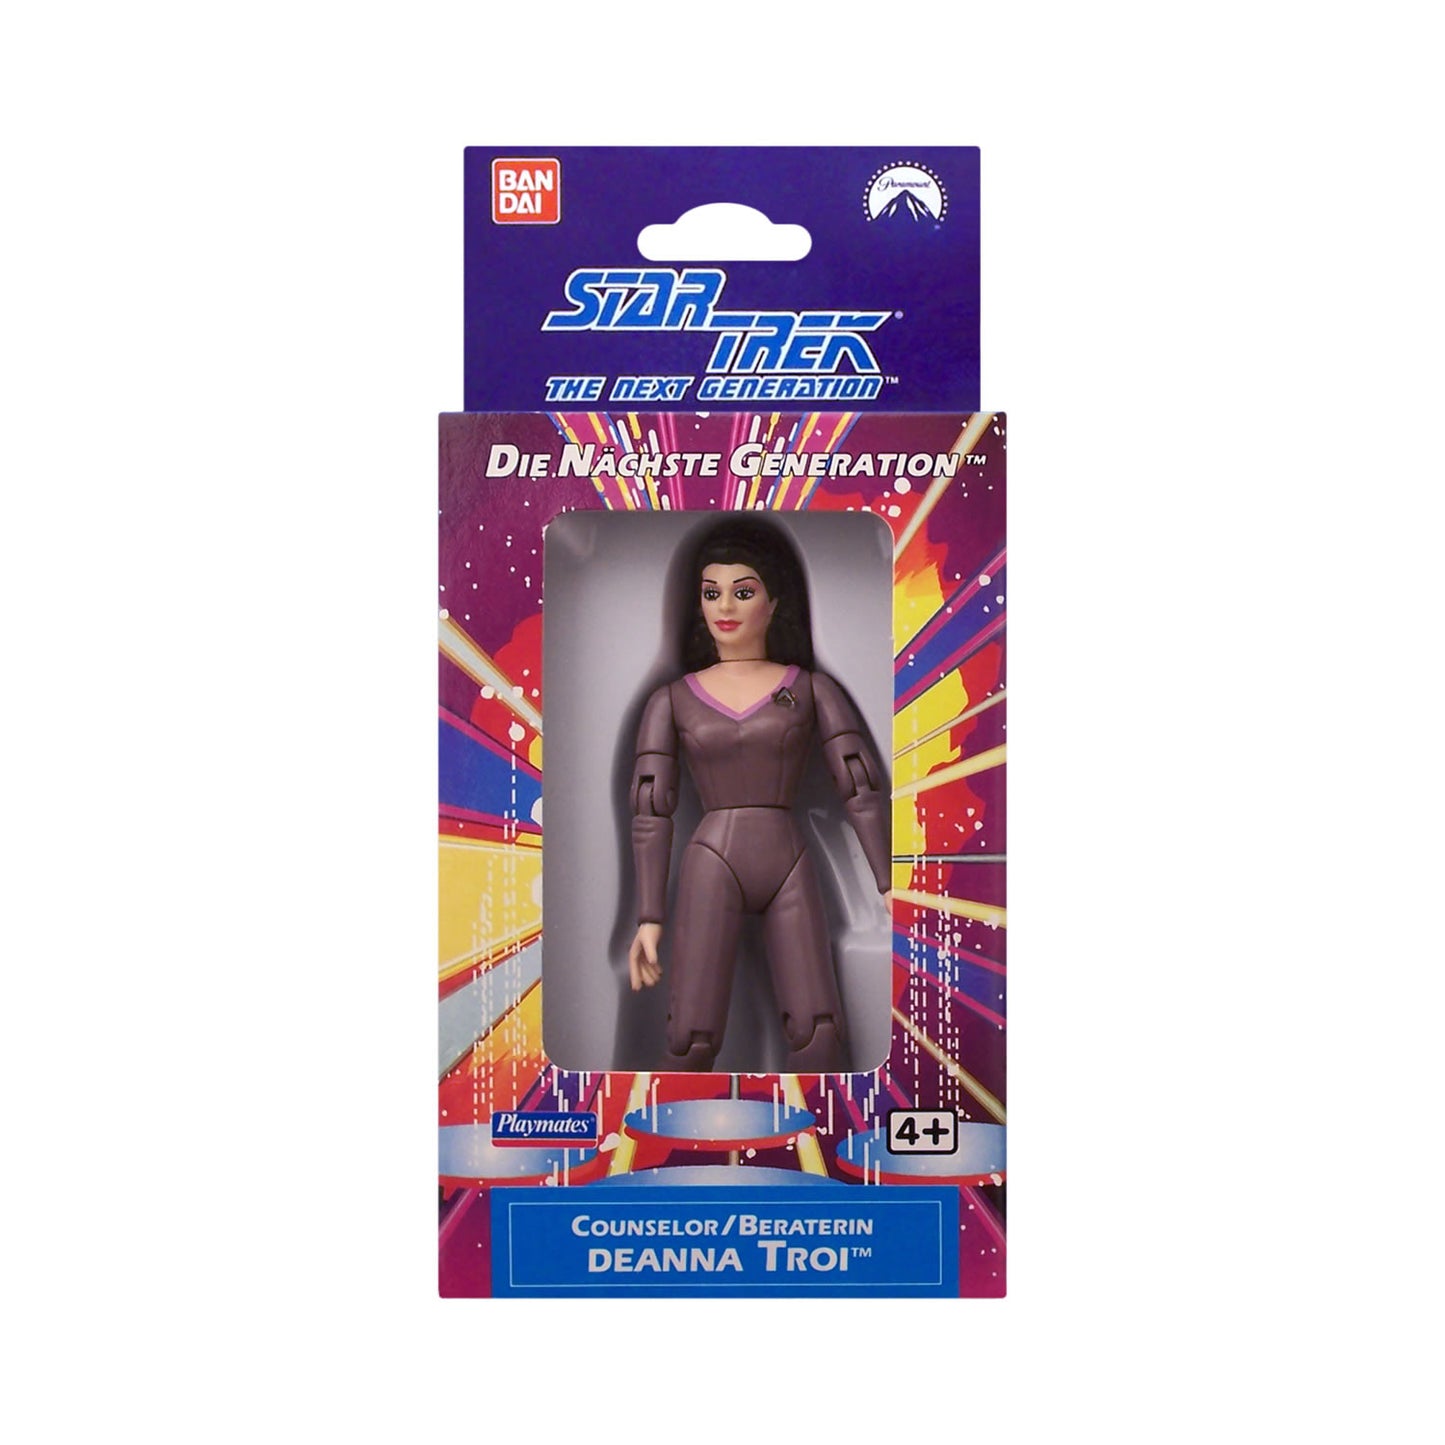 German-boxed Counselor Deanna Troi from Star Trek: The Next Generation